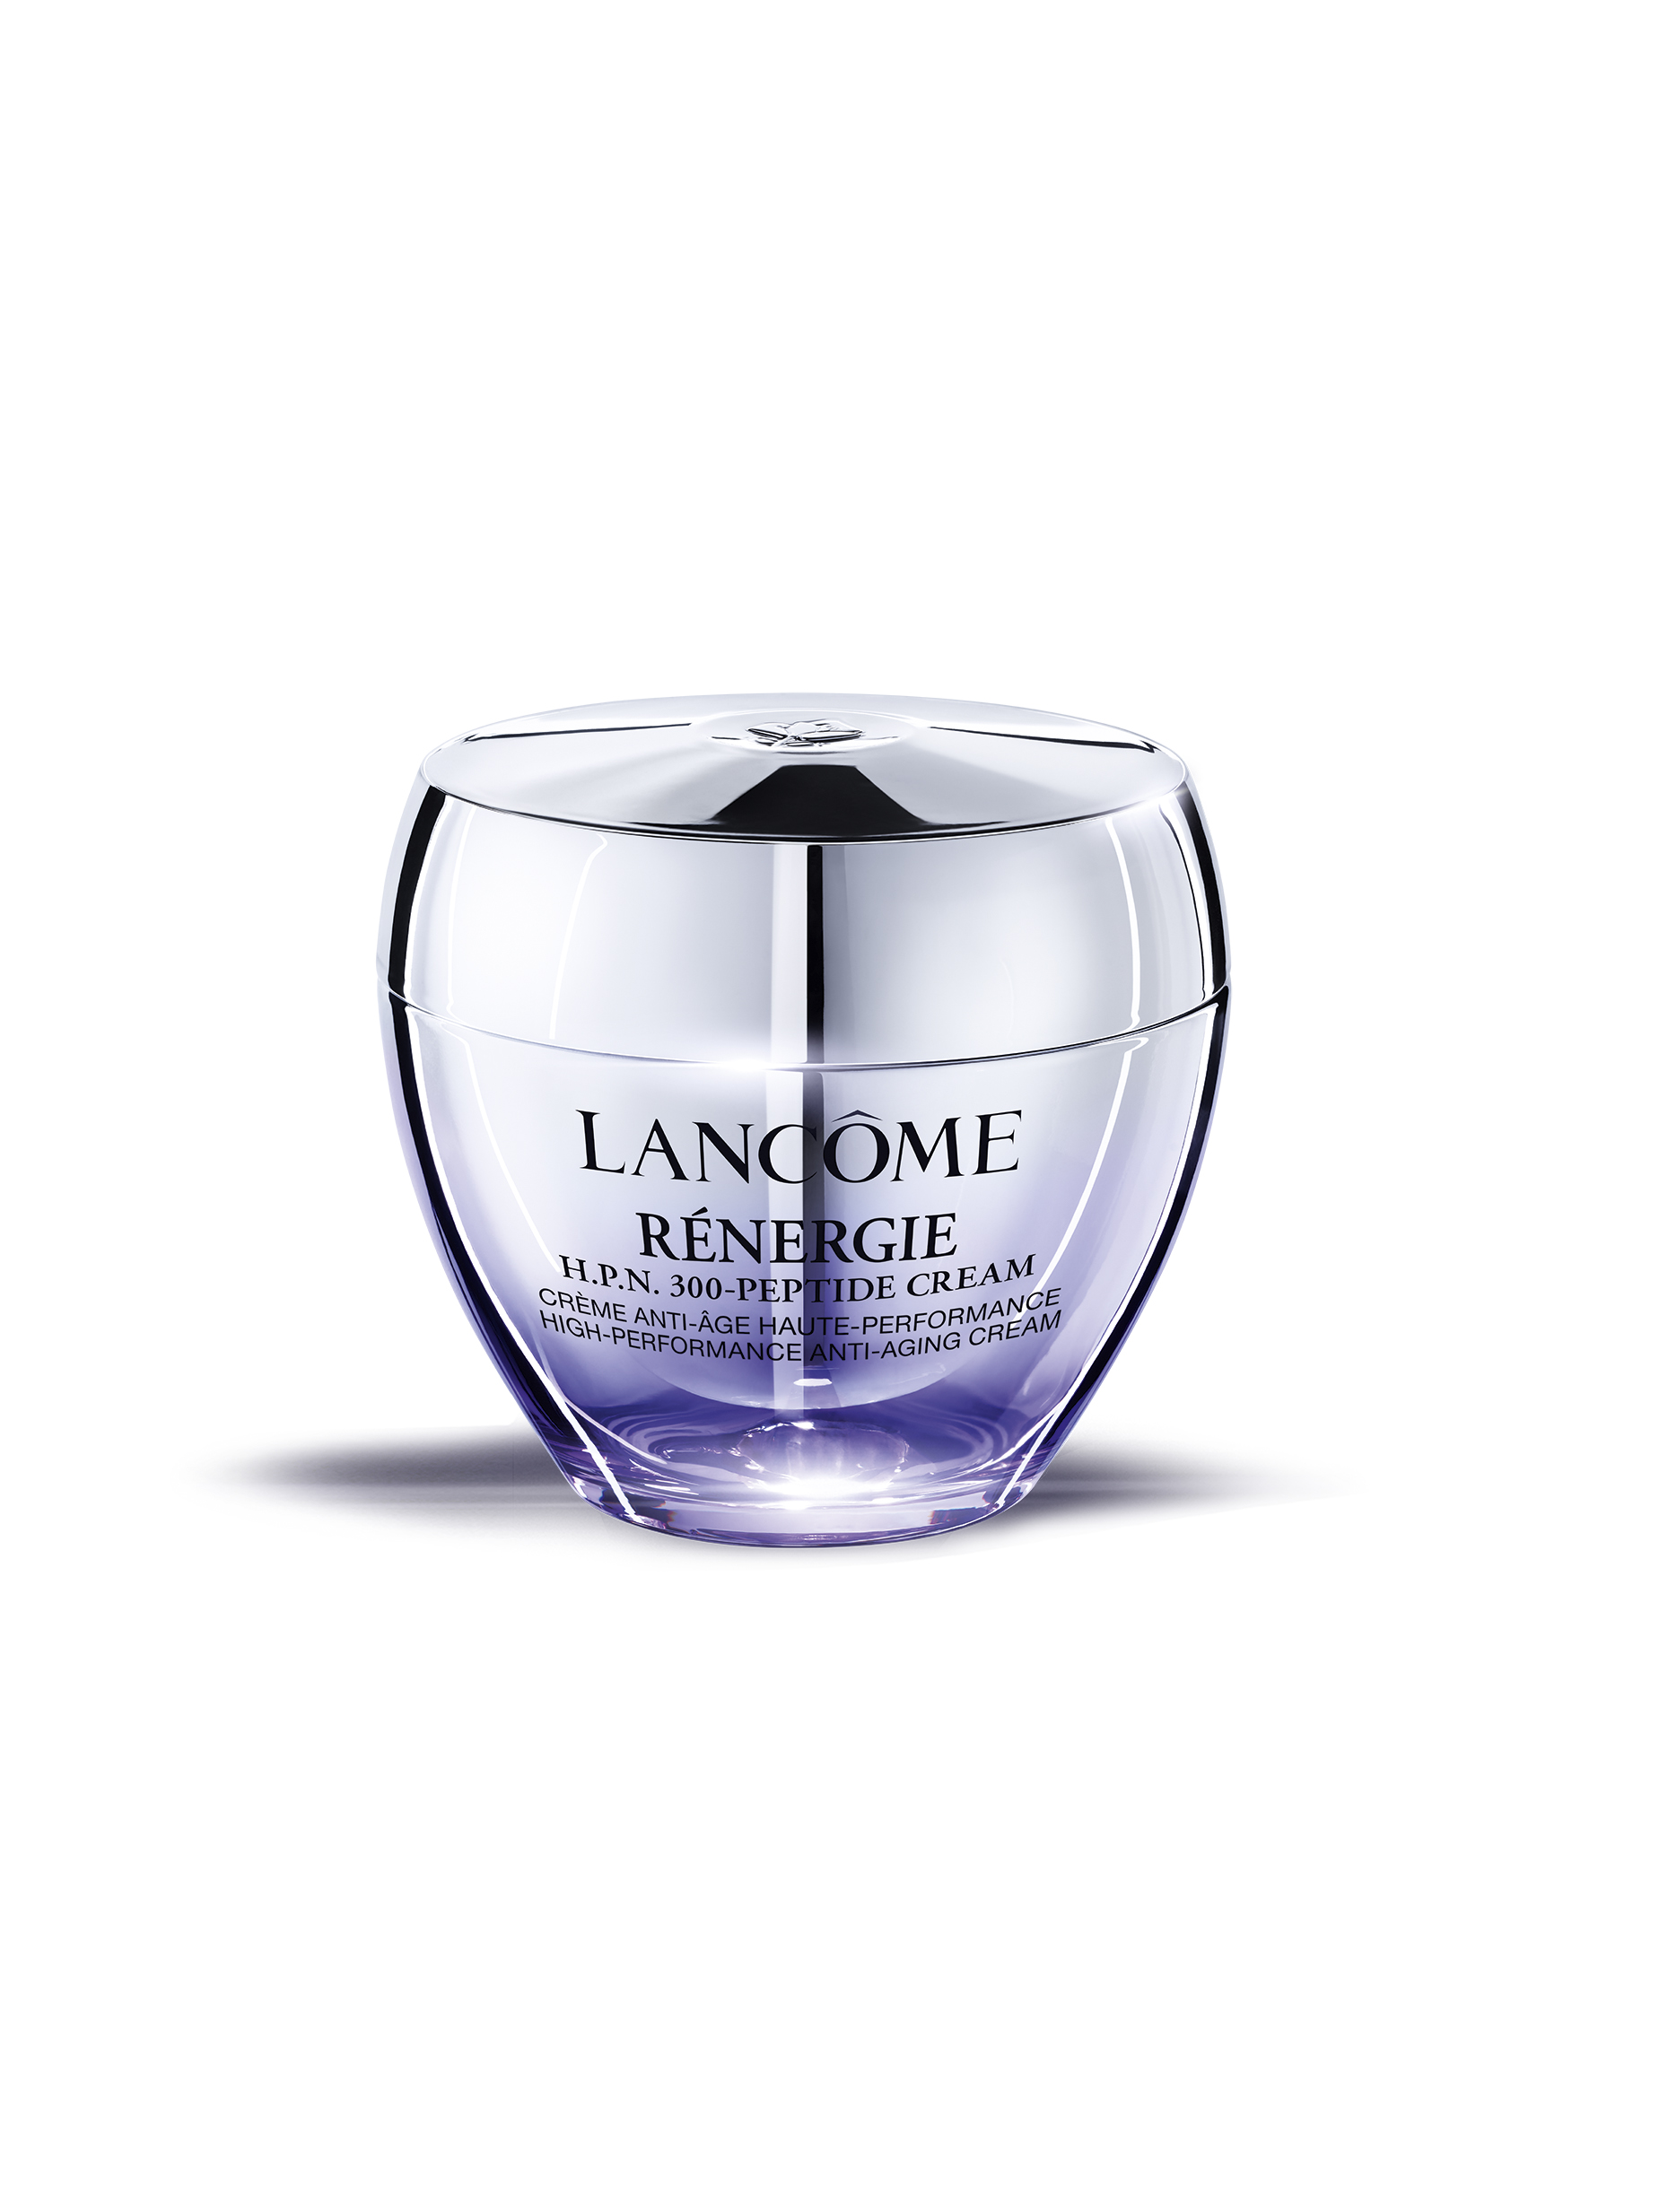 Rénergie HPN 300-Peptide Cream, from Lancôme (€125), which combines more than 300 types of natural peptides with hyaluronic acid and niacinamide to accelerate skin regeneration.